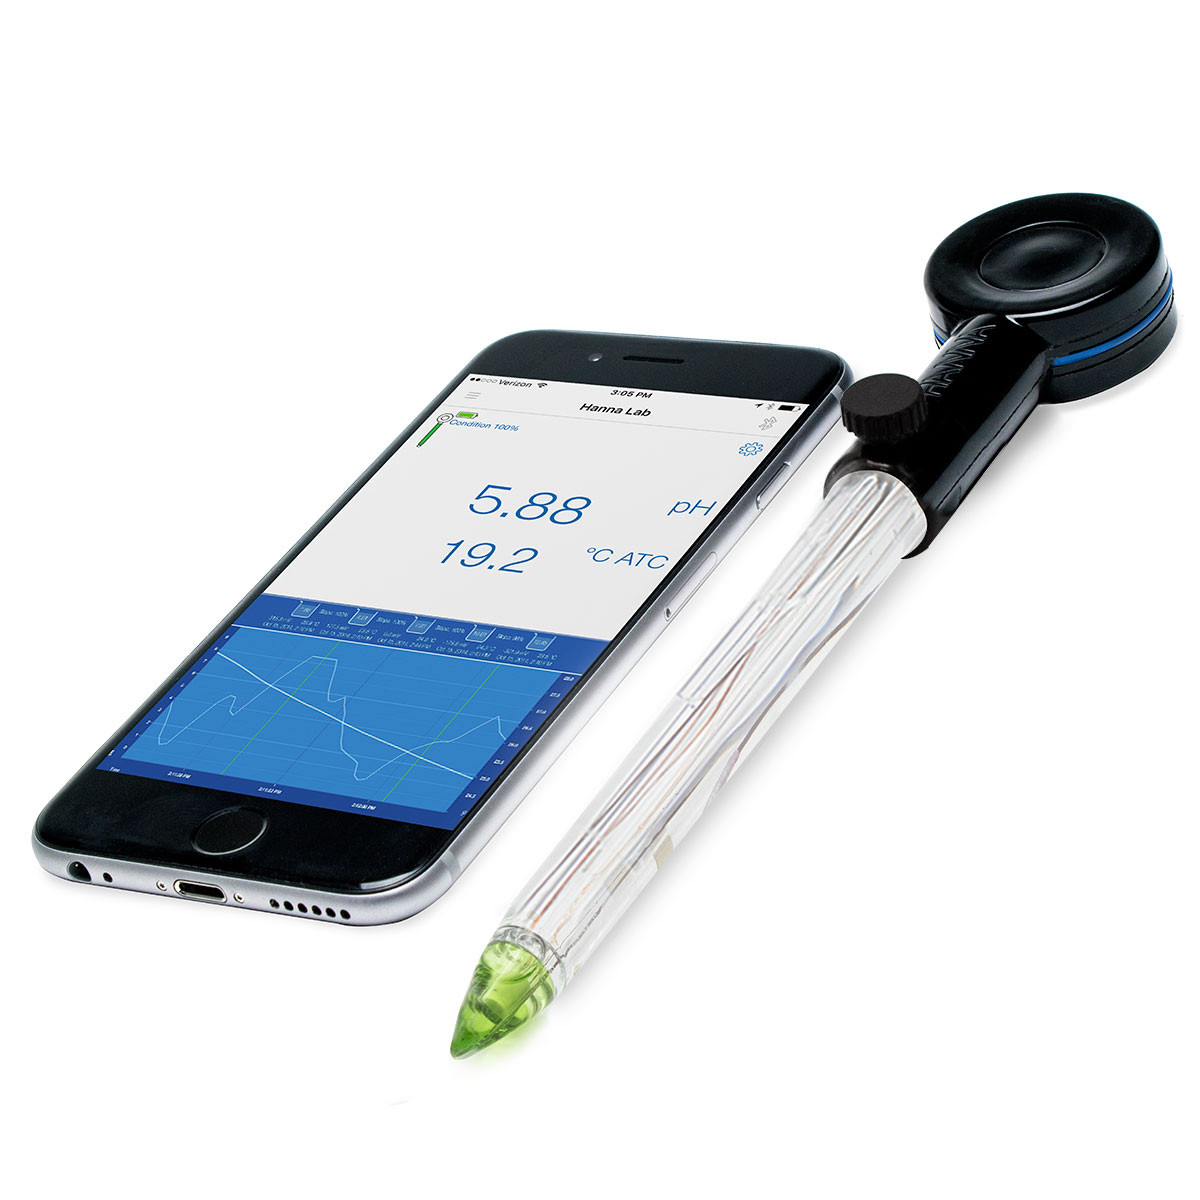 HALO Wireless pH Meter with Bluetooth connectivity